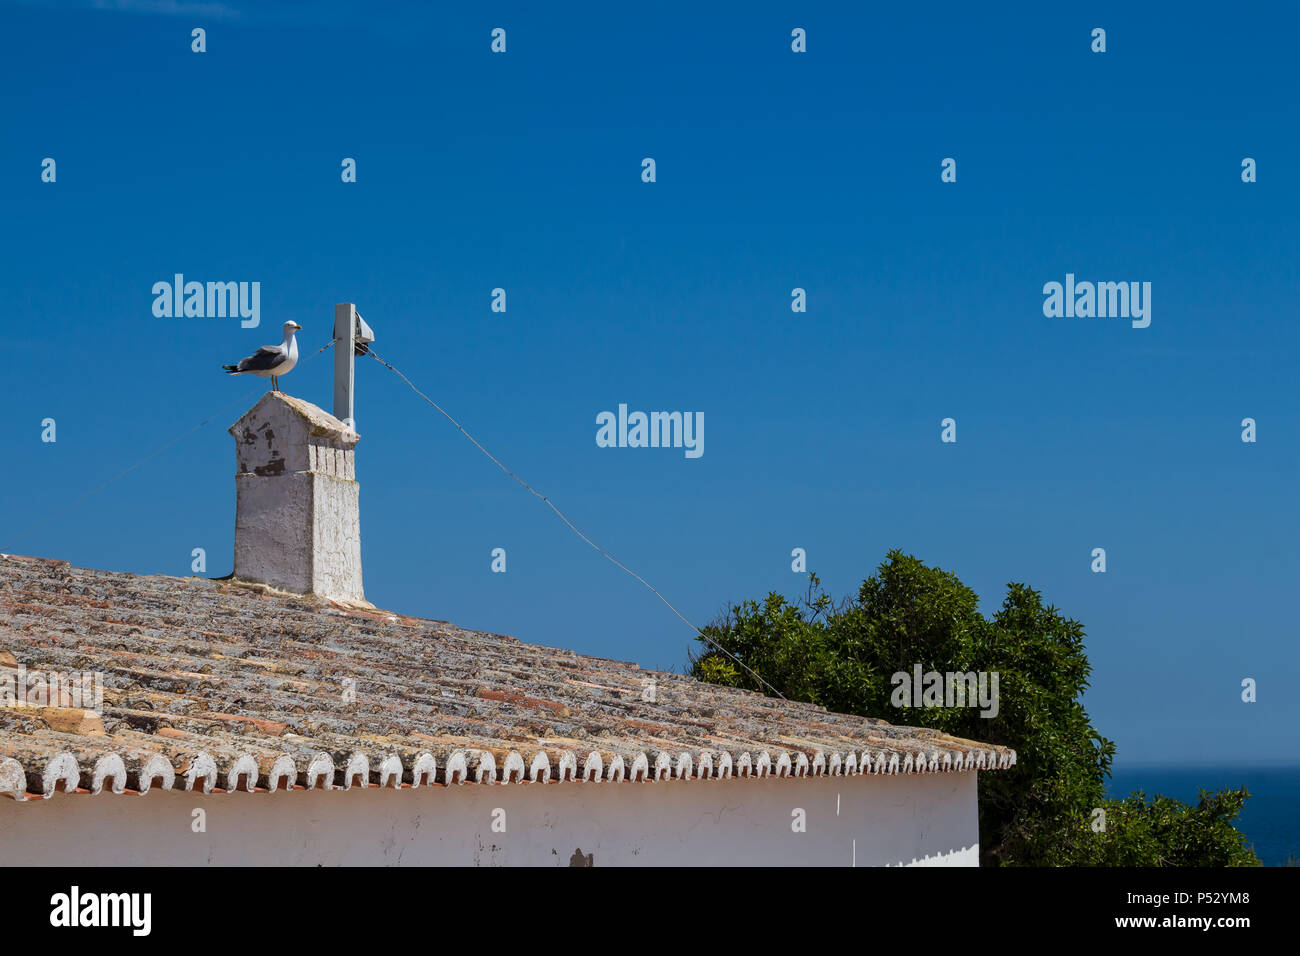 Roof of a building with old tiles and a chimney. Seagull on the chimney. Big tree, horizon of the Atlantic Ocean and a blue sky in the background. Por Stock Photo